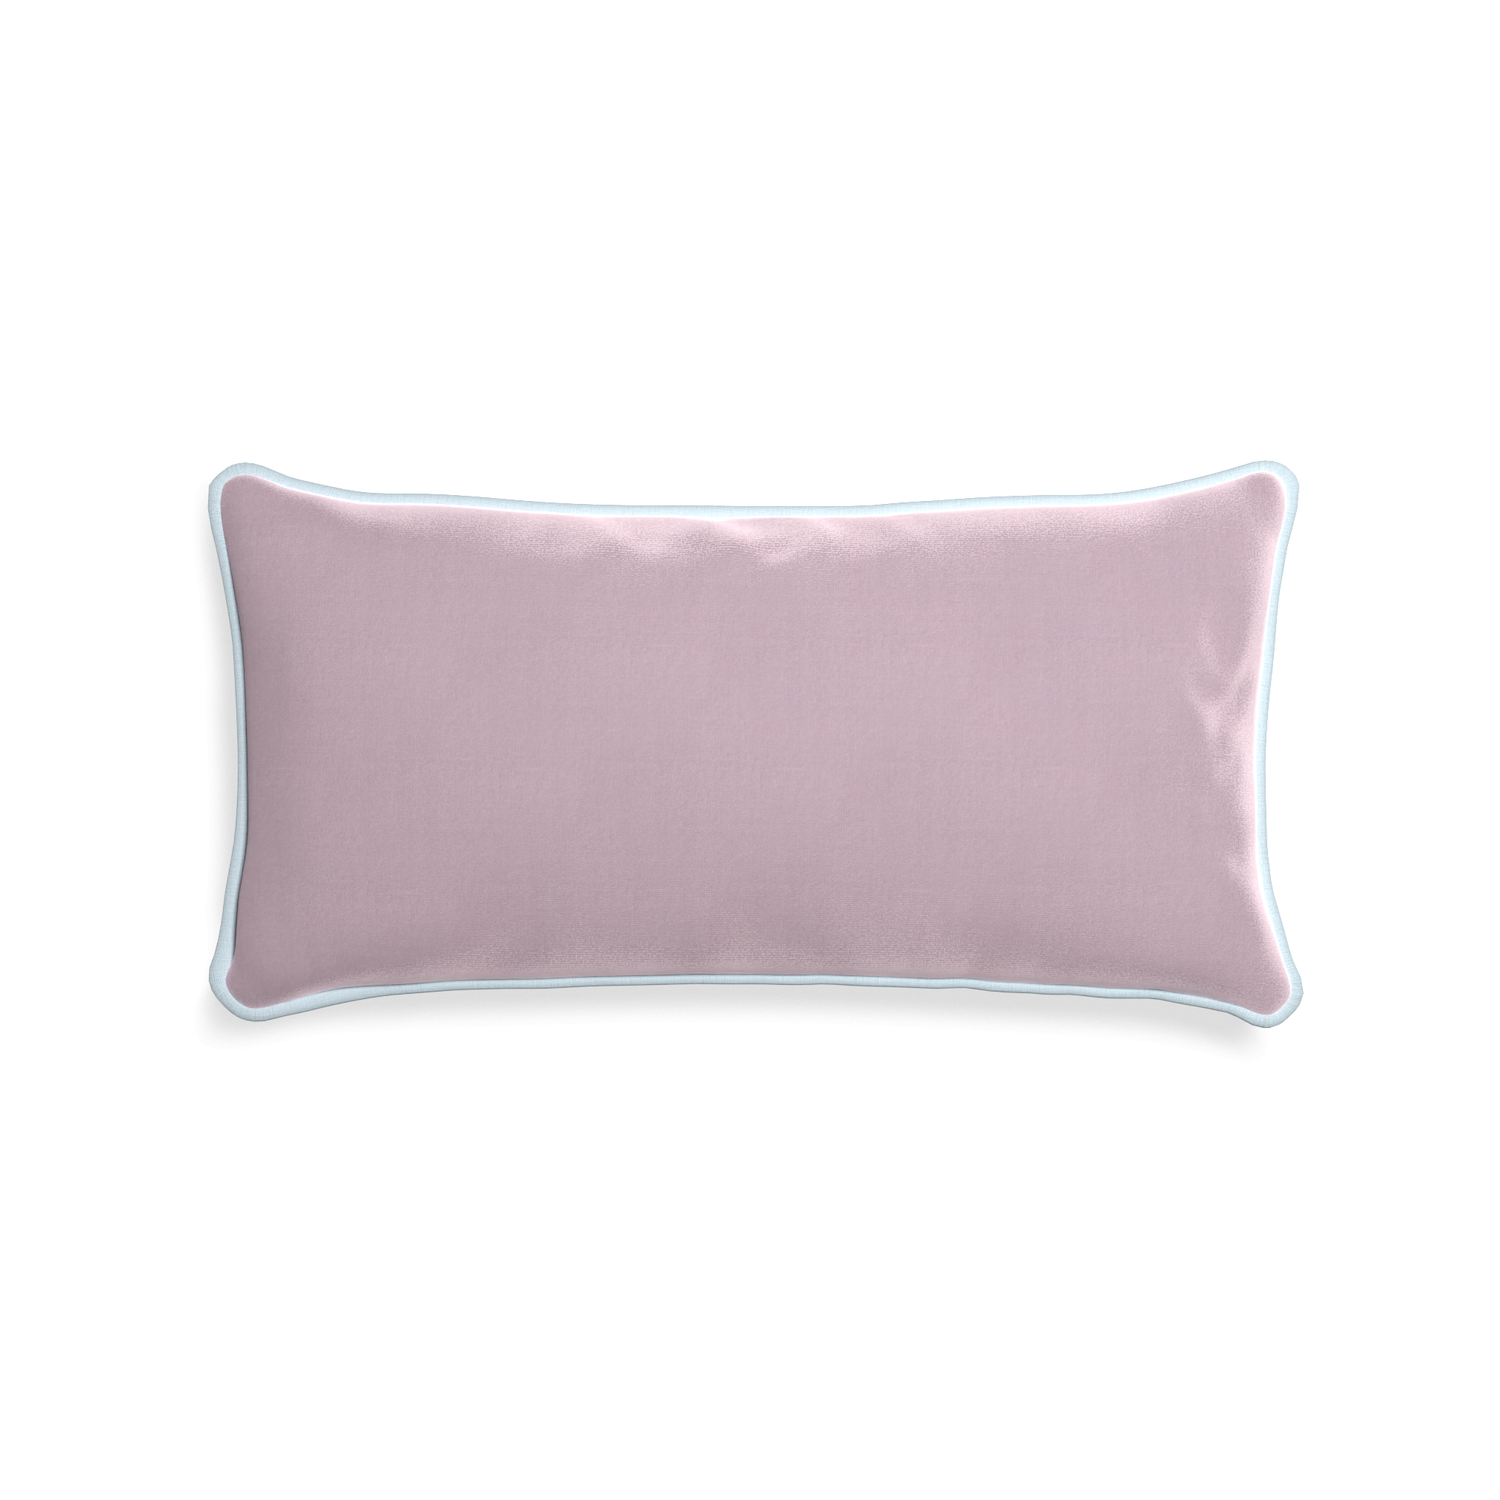 Midi-lumbar lilac velvet custom lilacpillow with powder piping on white background